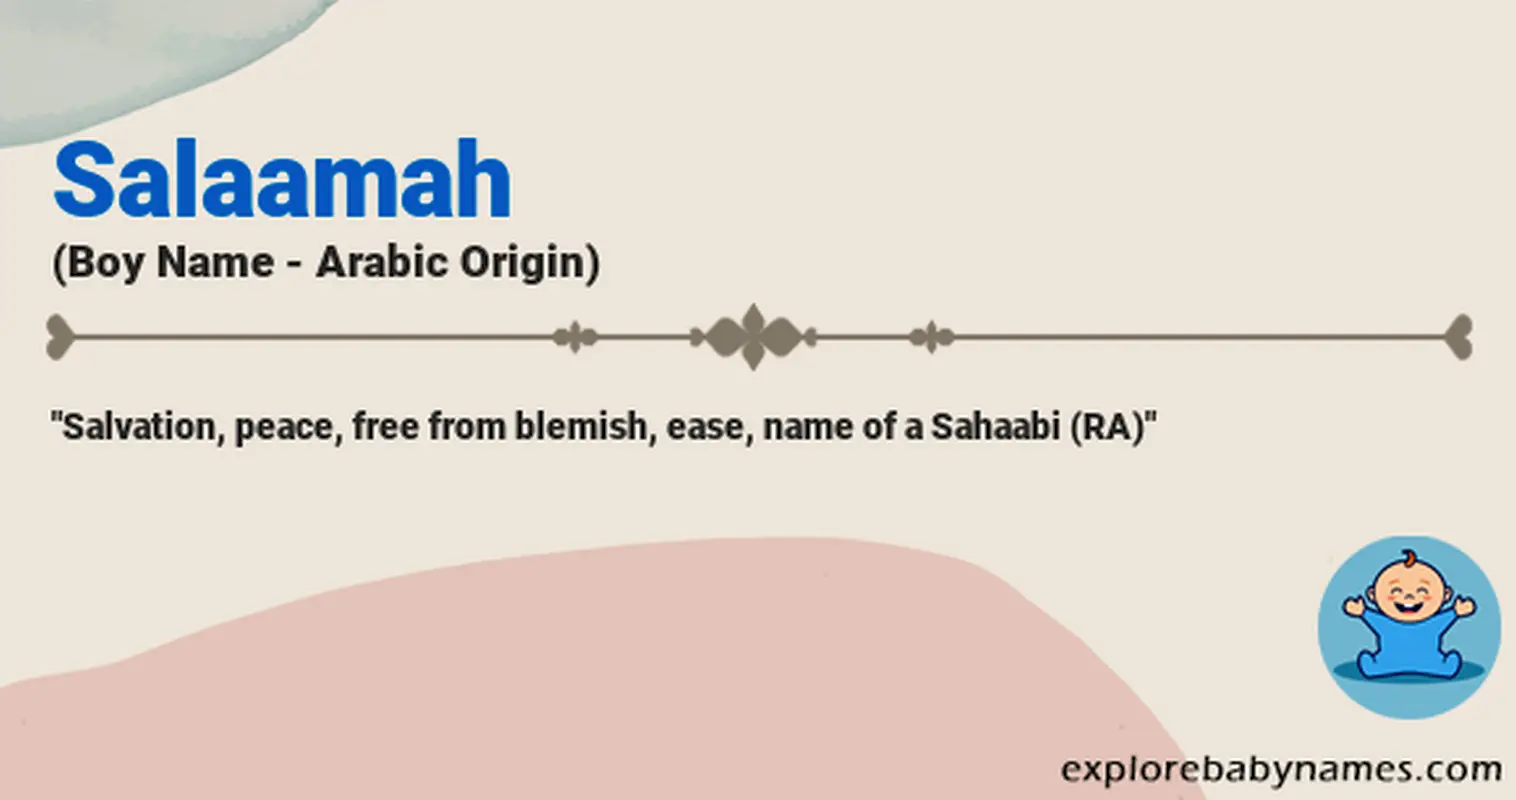 Meaning of Salaamah